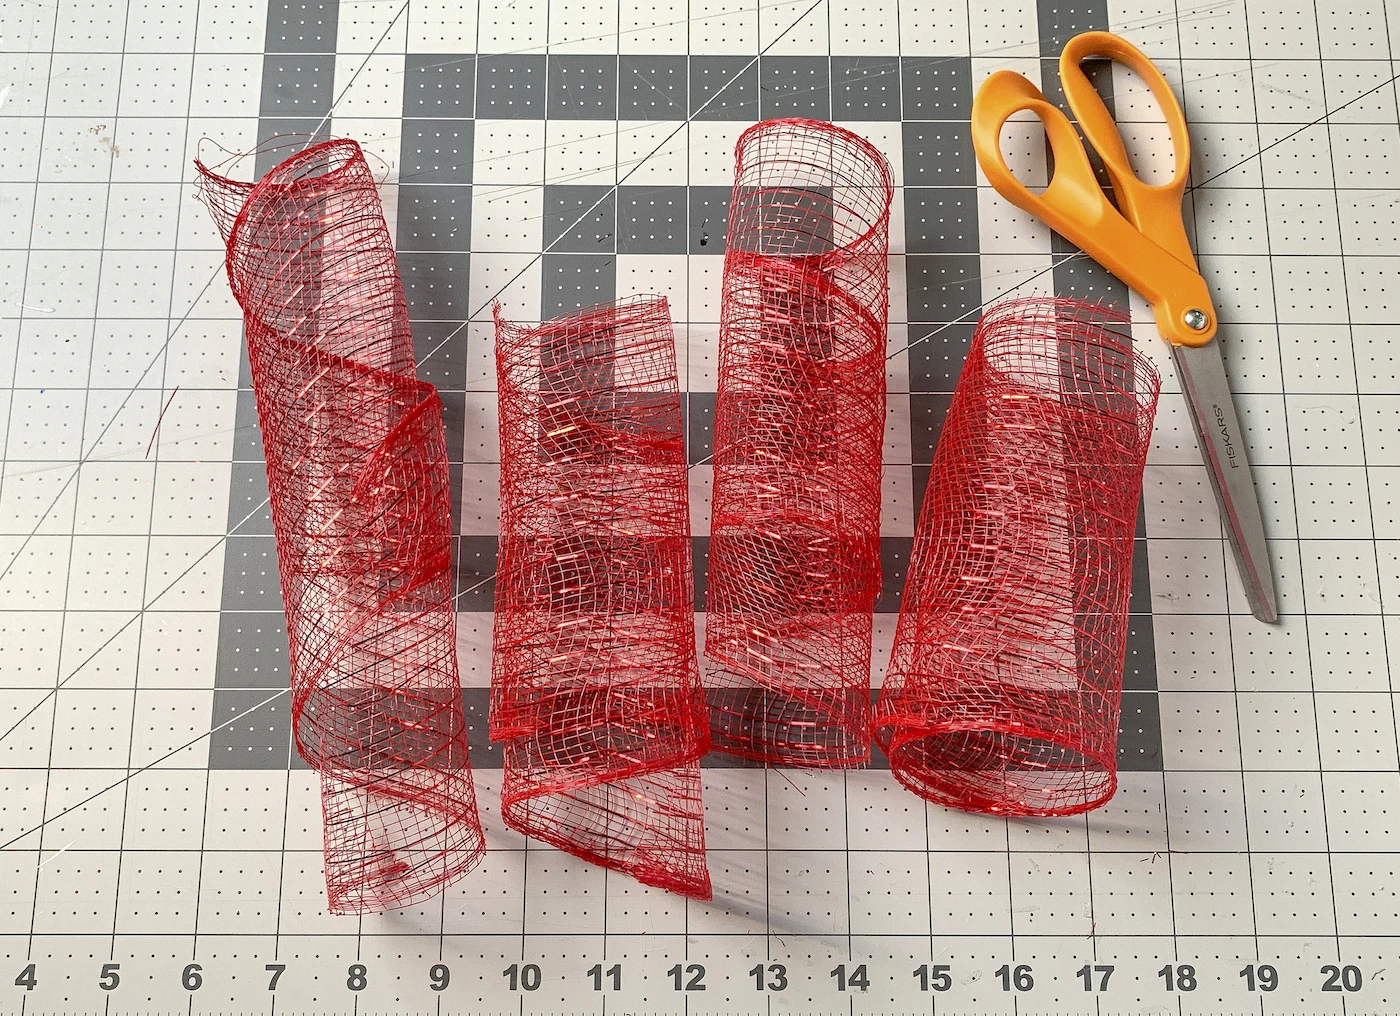 Four lengths of red deco mesh and a pair of scissors